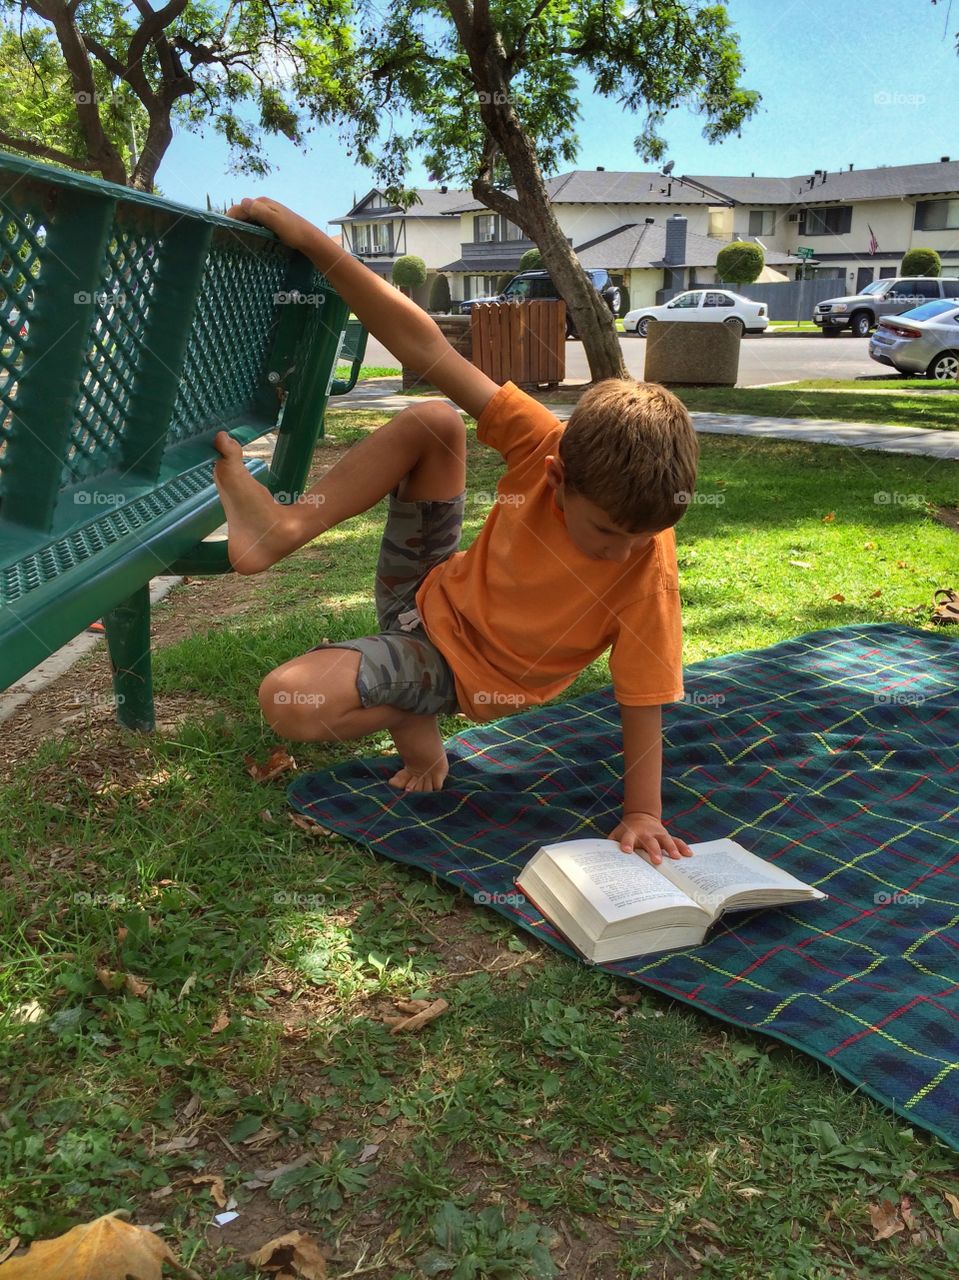 A boy is reading while clinging to the bench. He is immersed in action, very concentrated on what he is reading. 